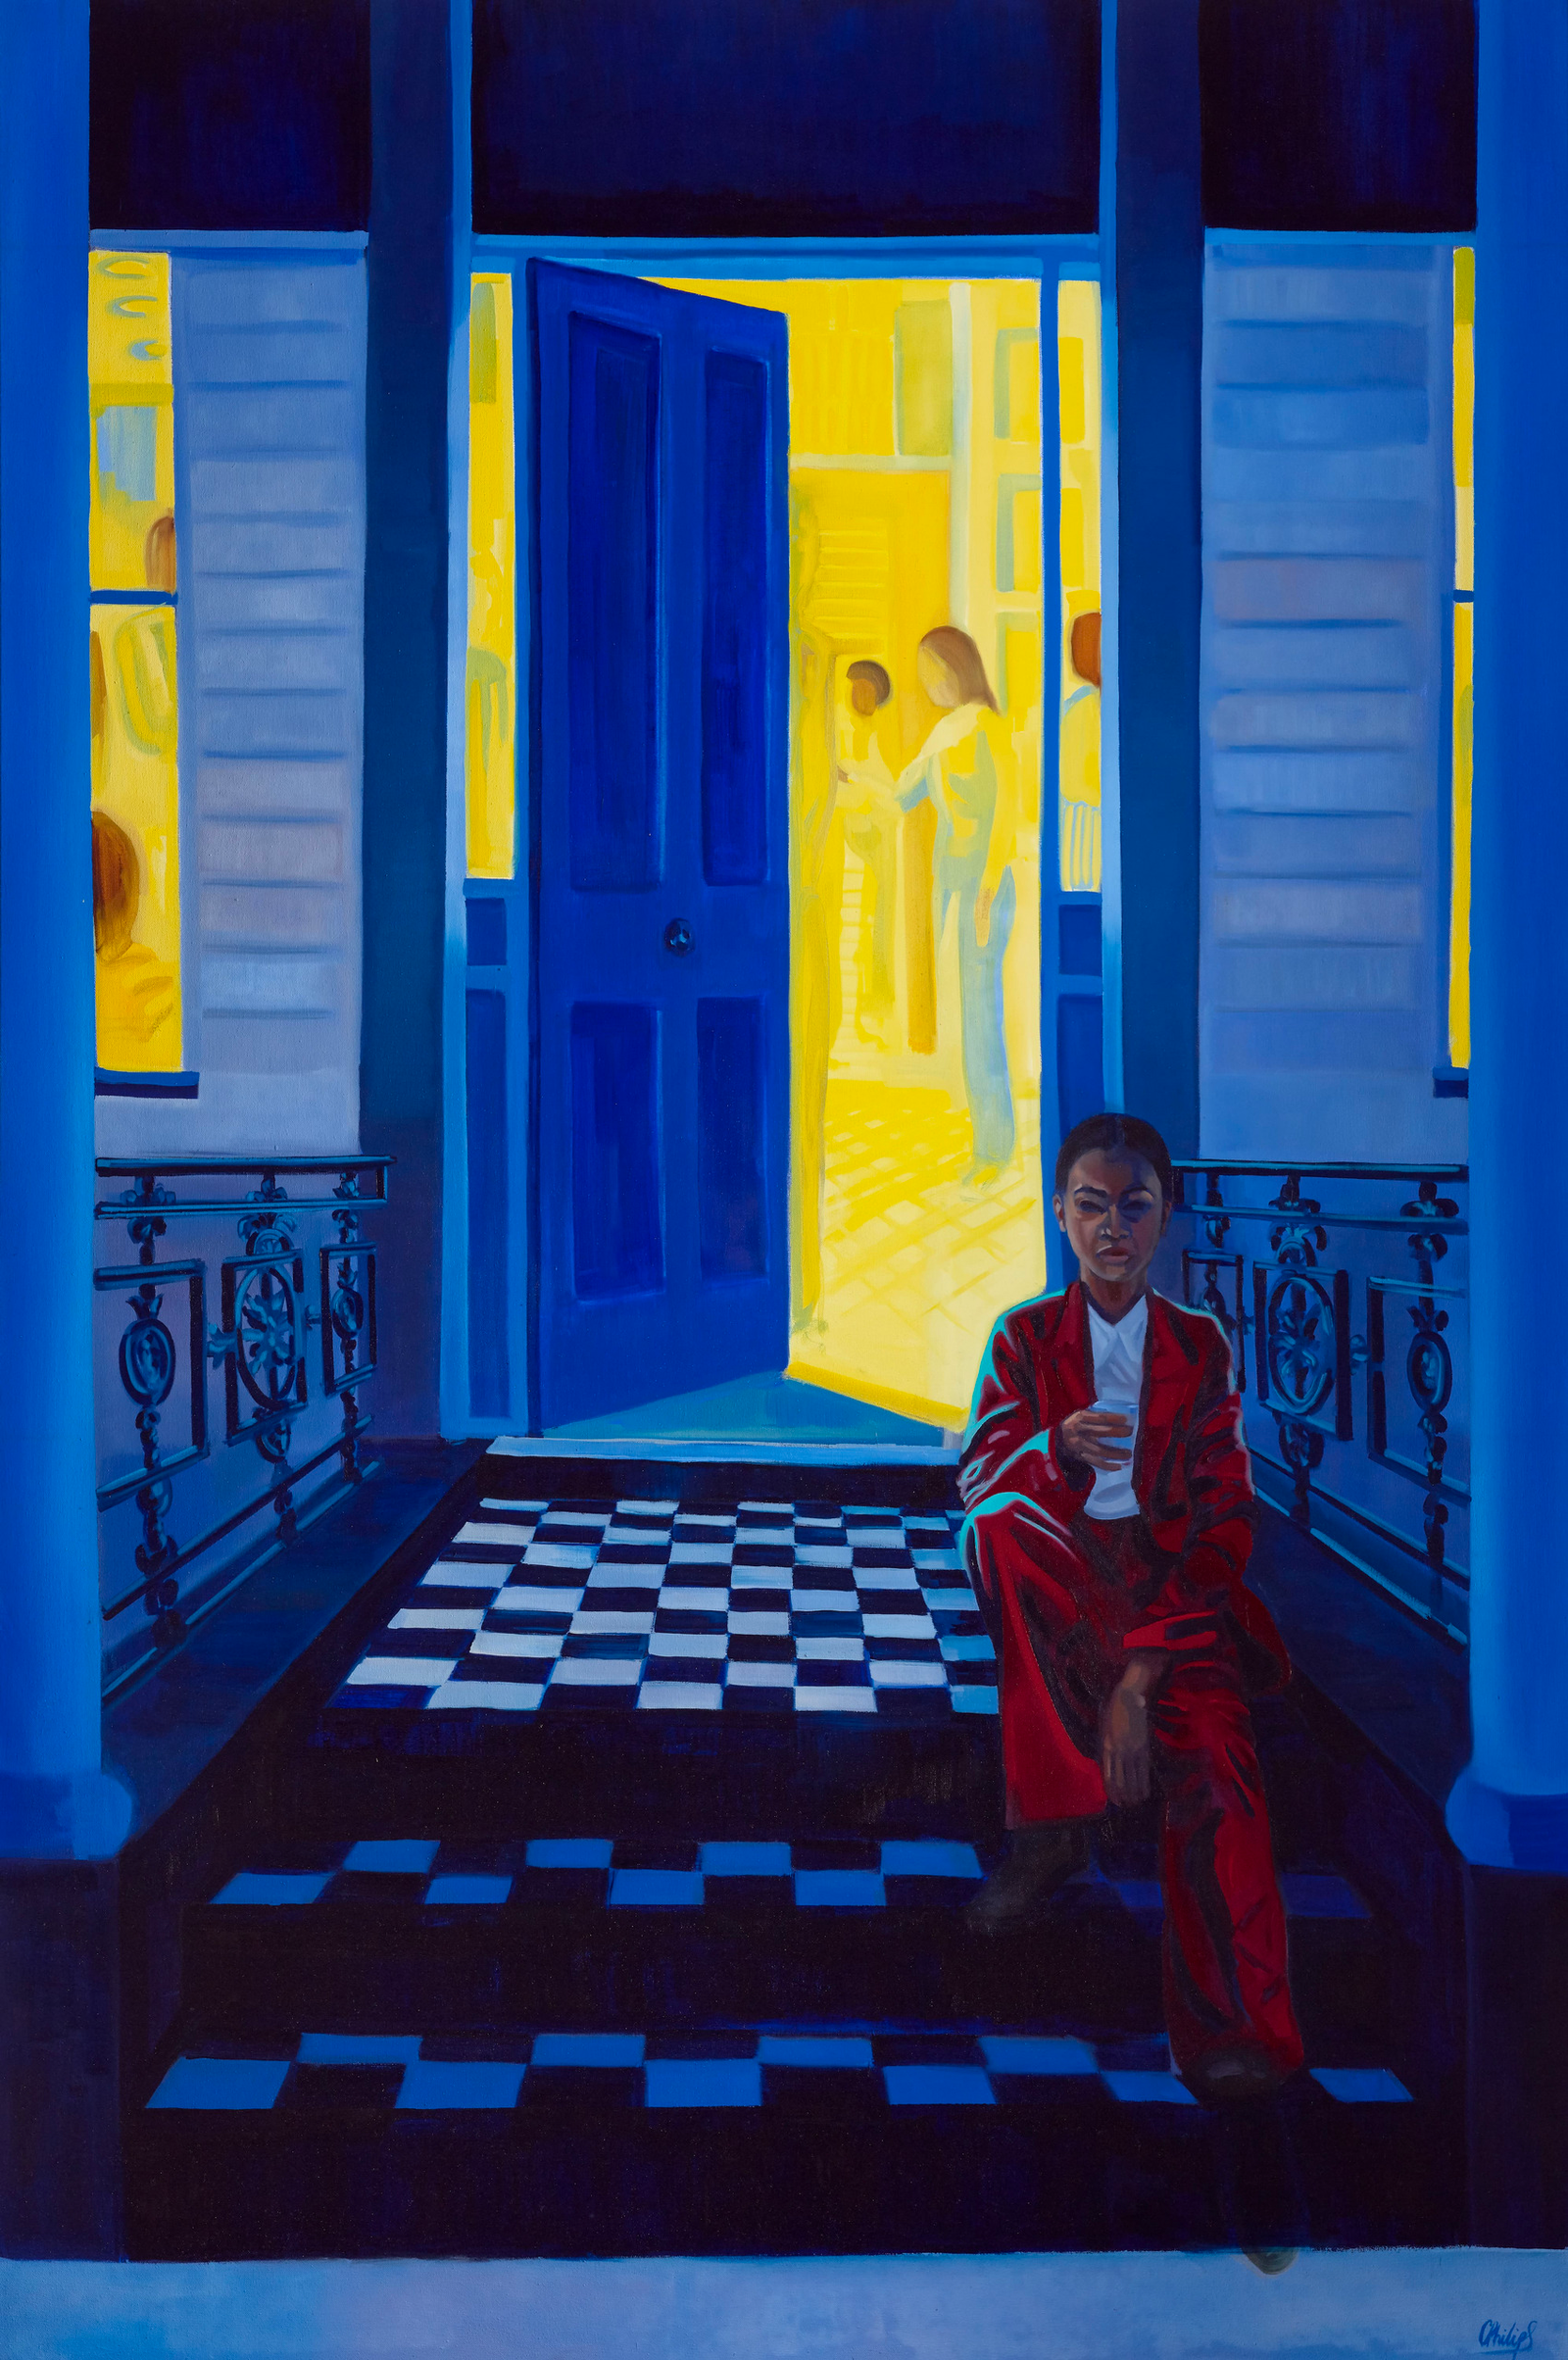 A woman in a red suit sits atop tiled steps. Behind her a door is ajar with abstract figures in yellow light.